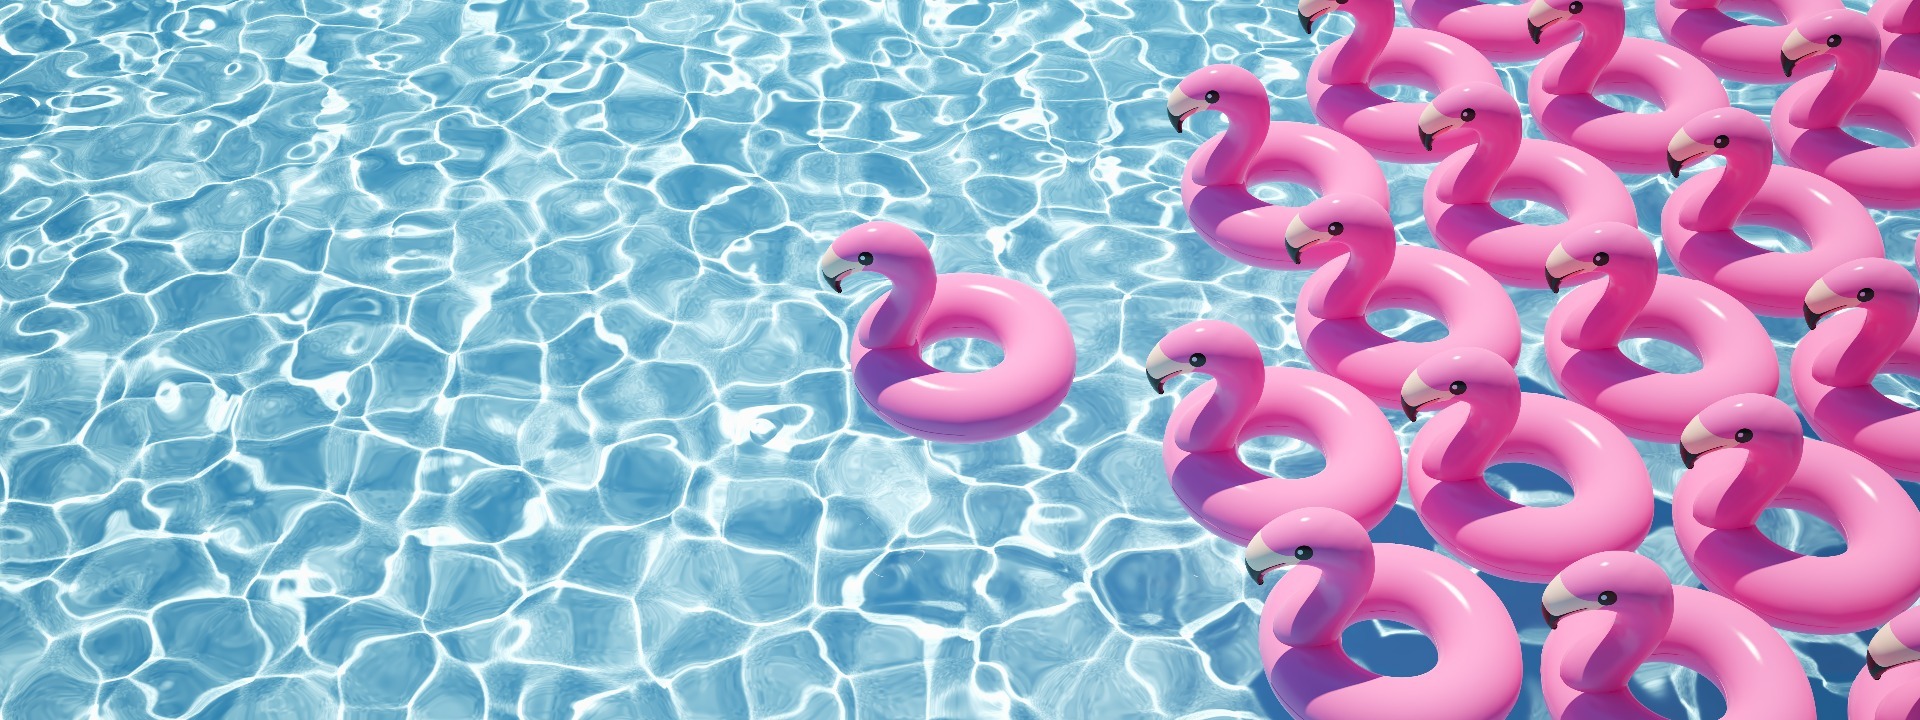 Flamingo Pink Floats floating around on clear, blue water